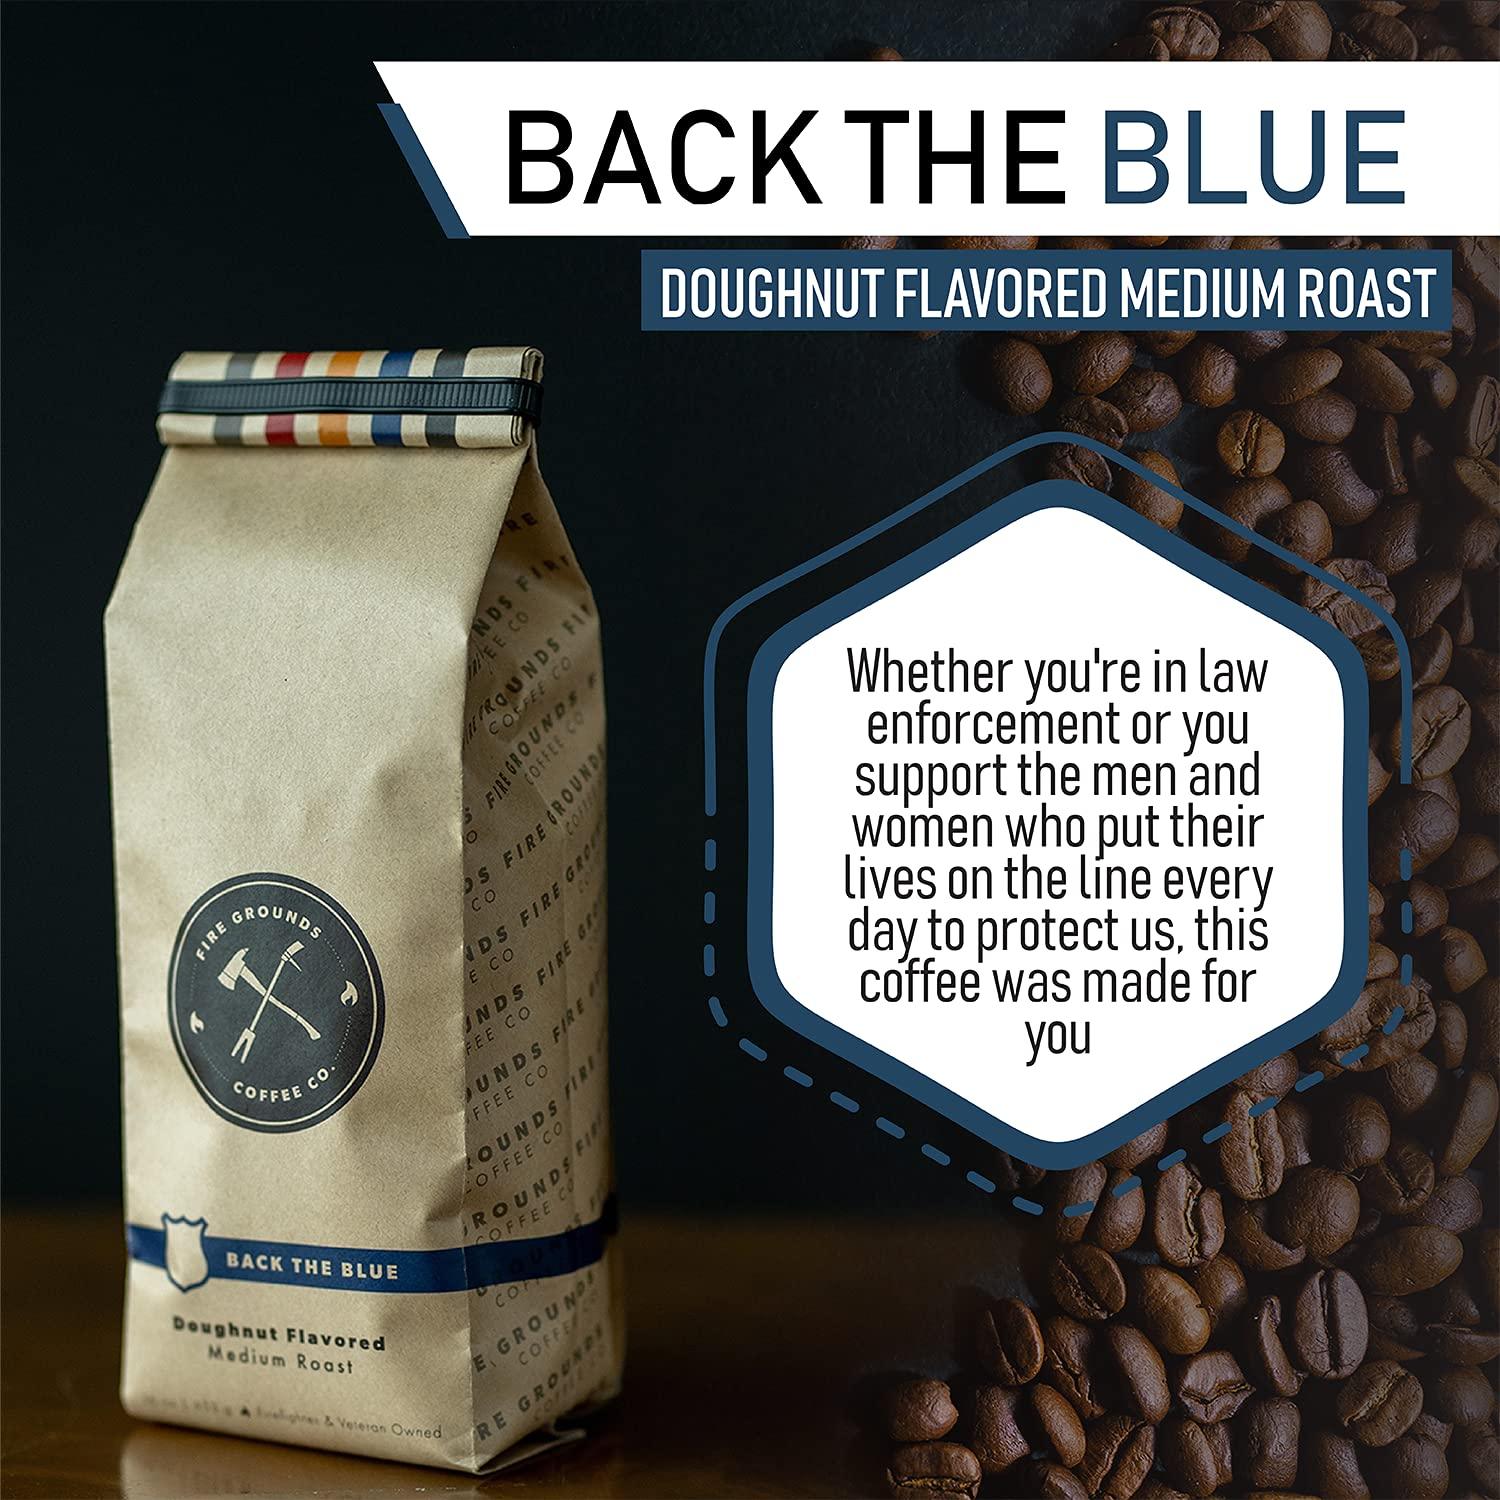 BACK THE BLUE (DOUGHNUT FLAVORED MEDIUM ROAST) by Fire Grounds Coffee Company - The Hammer Sports